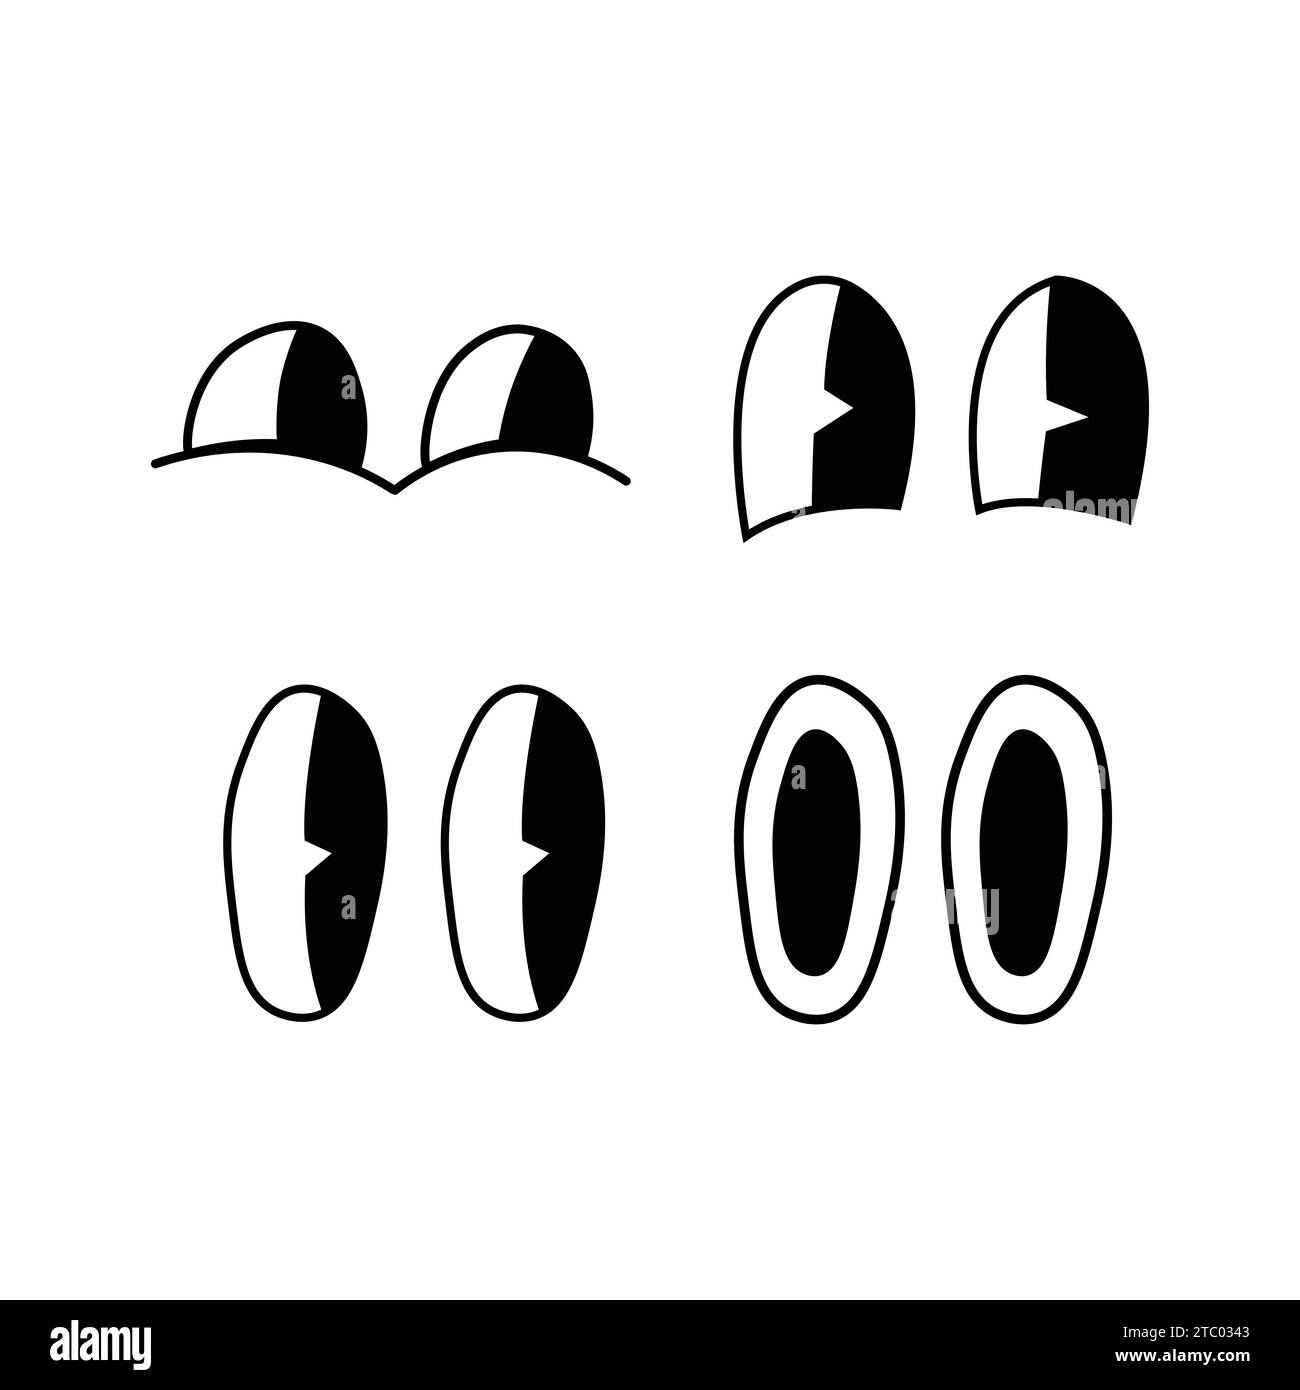 Groovy eyes expressions black and white set. 90s style faces illustration for print. Stock Vector